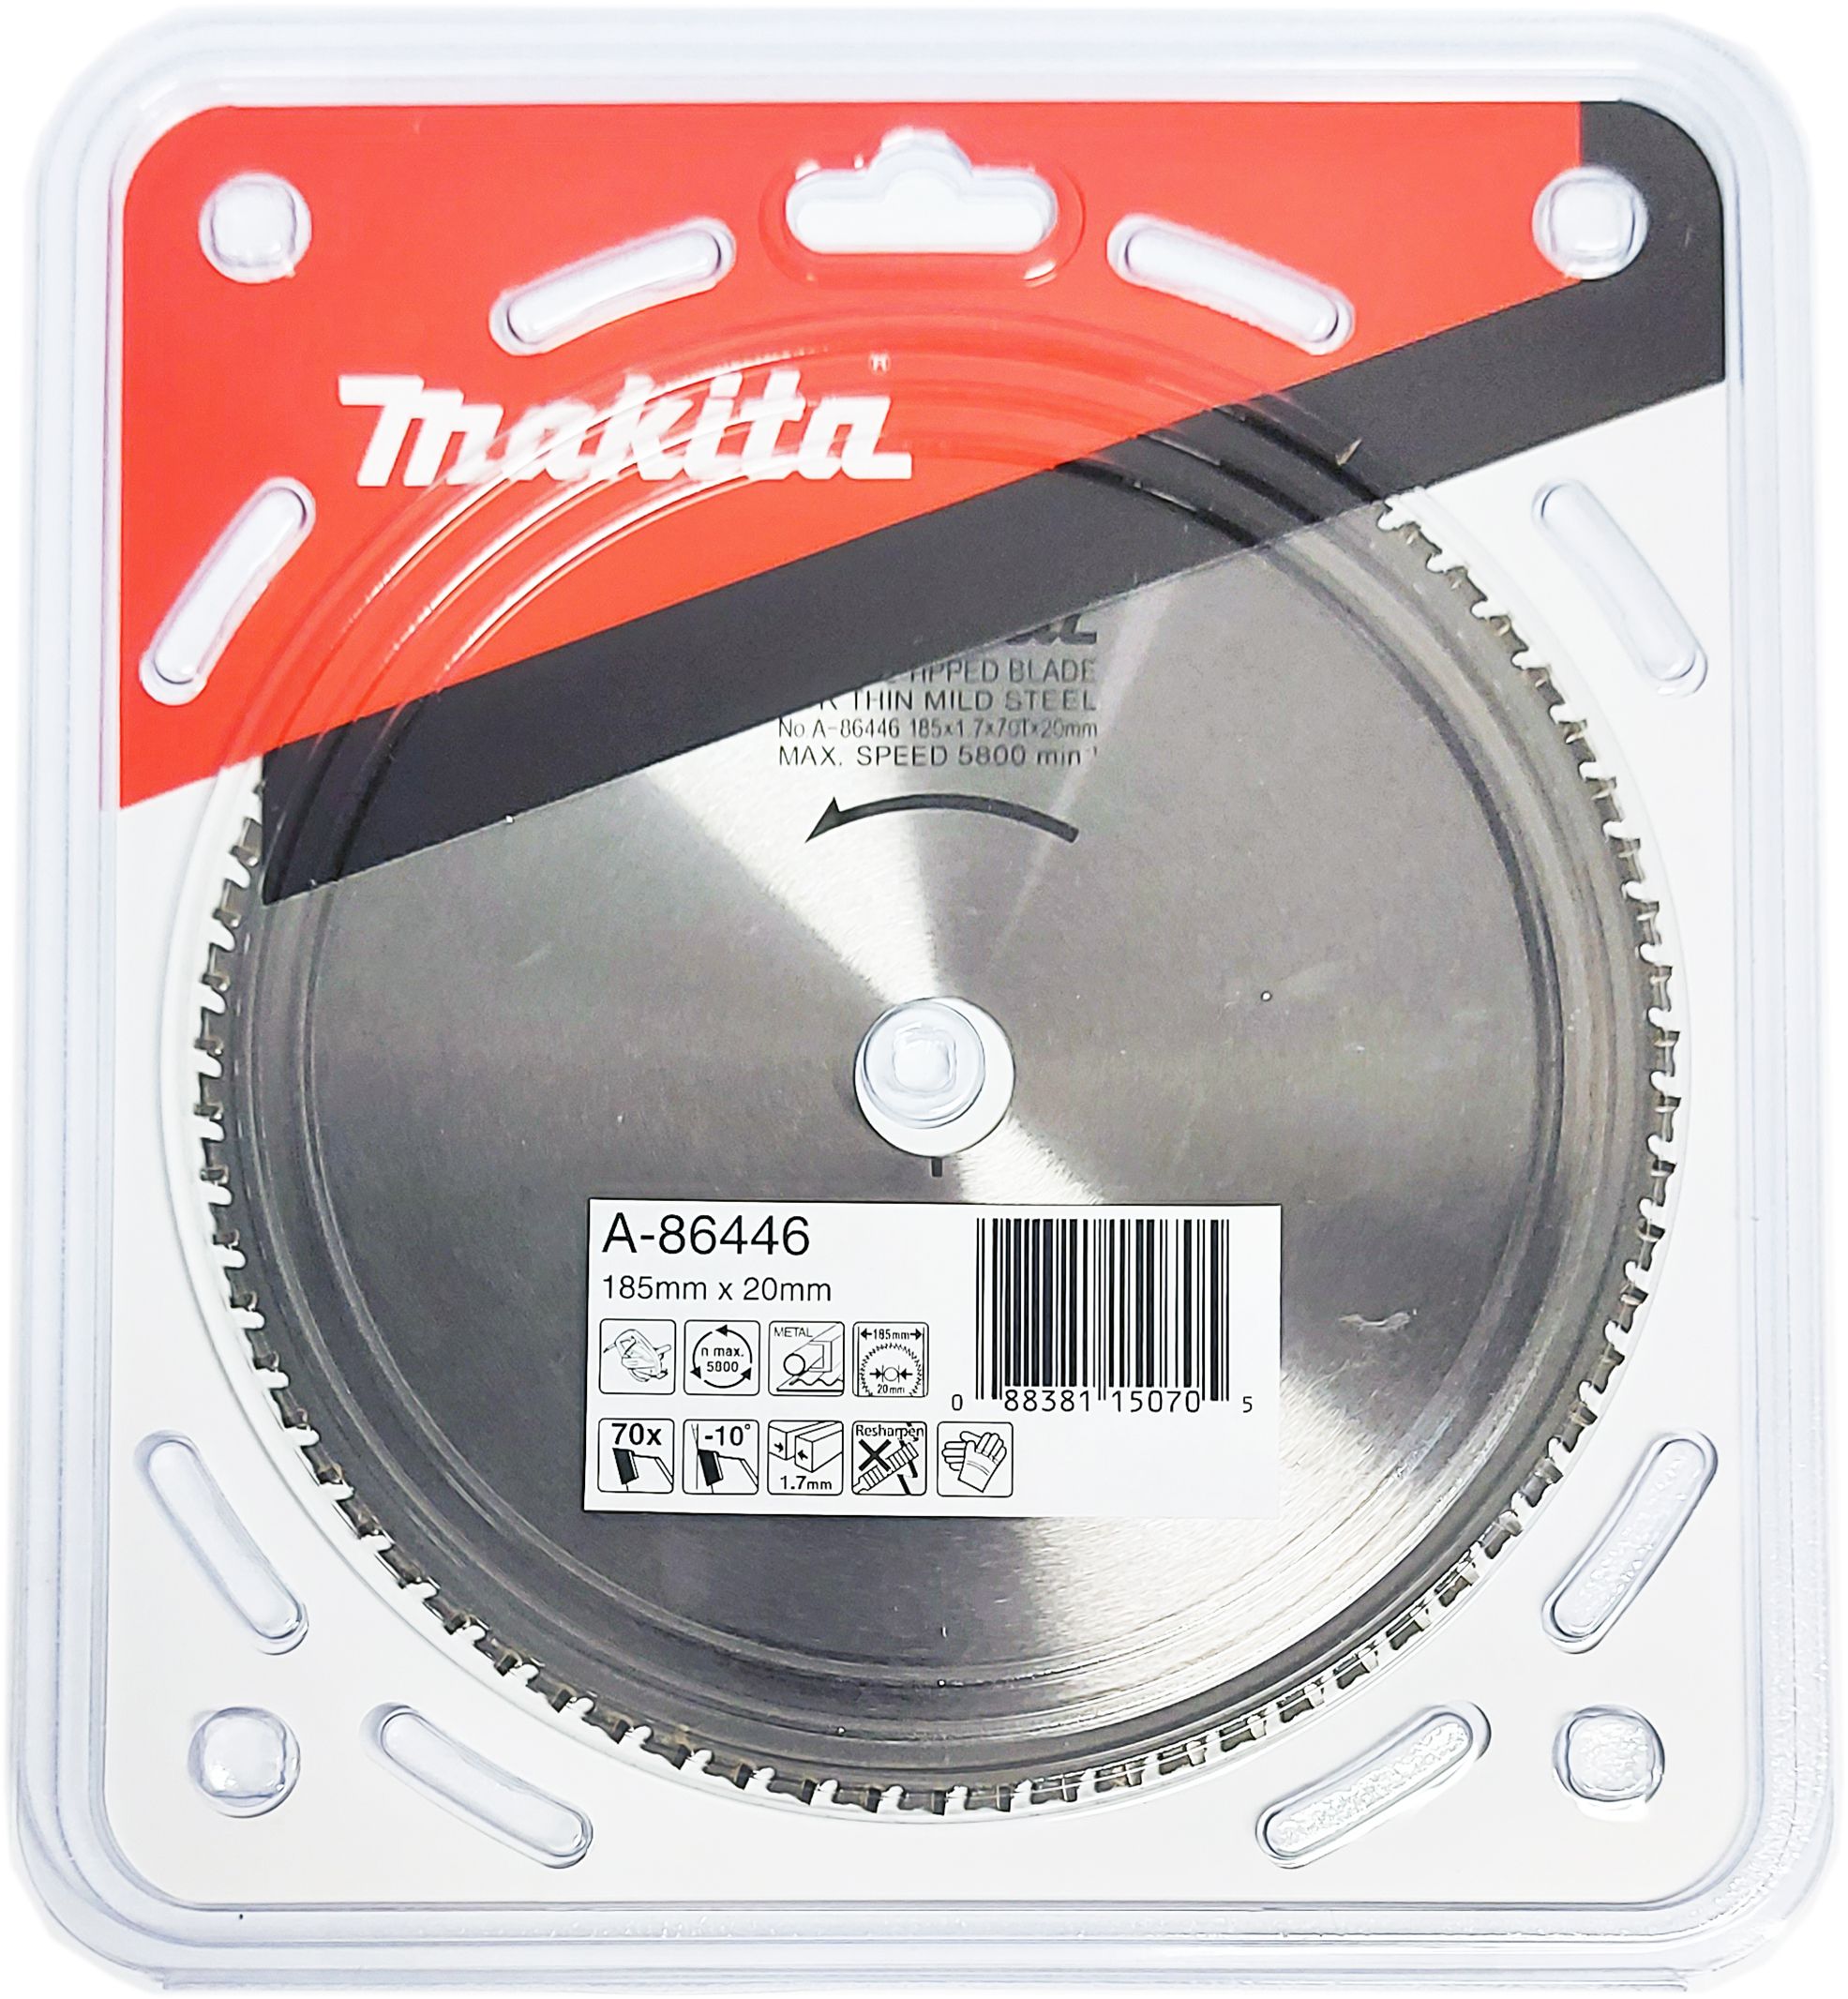 Makita Metal Cutting Blade 185mm x 20mm 70T A-86446 Power Tool Services